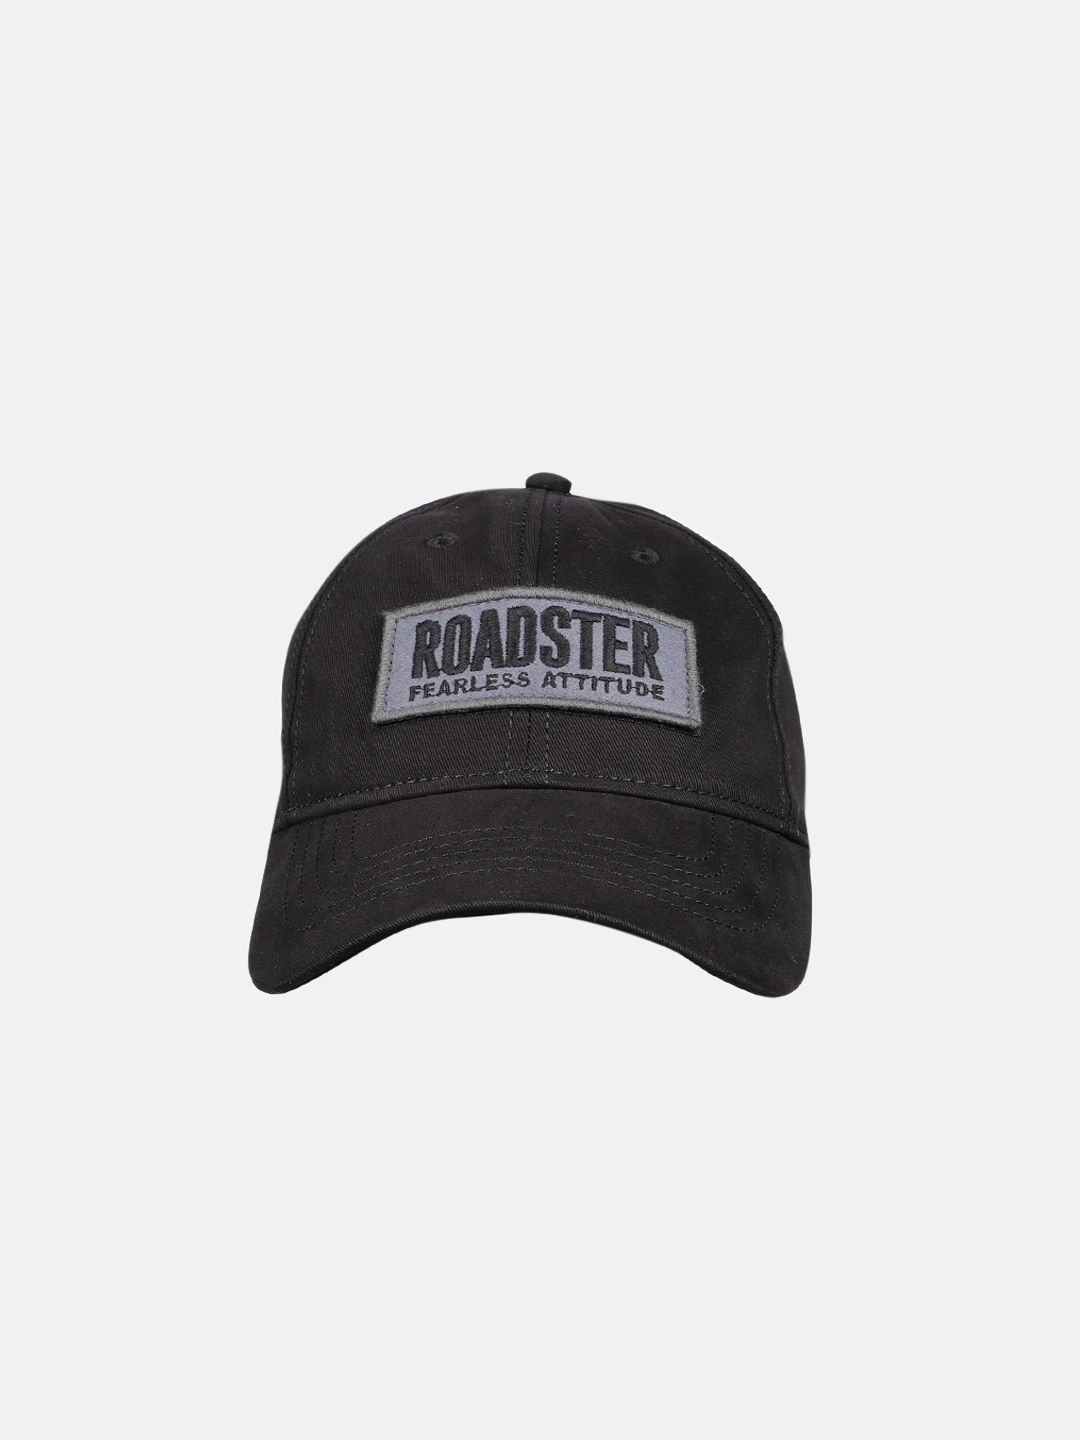 Roadster Unisex Black Embroidered Baseball Cap Price in India